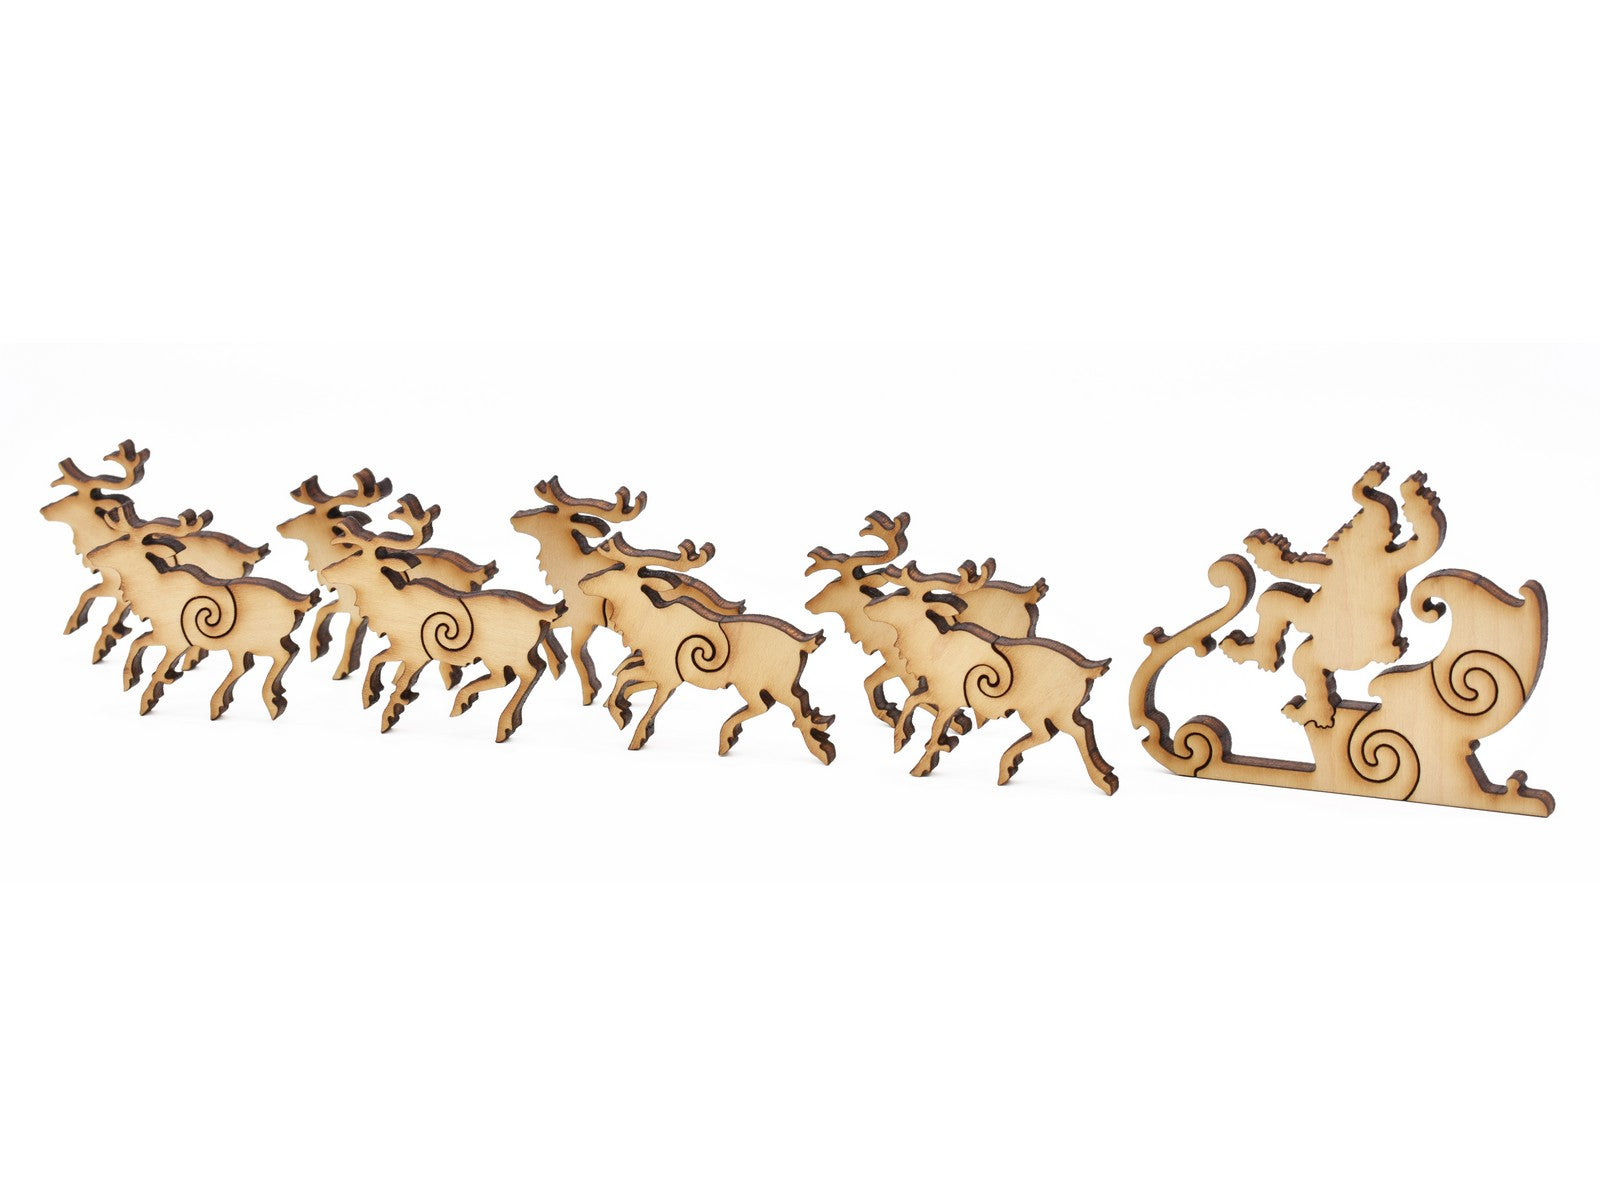 A closeup of pieces in the shape of Santa and his sleigh.